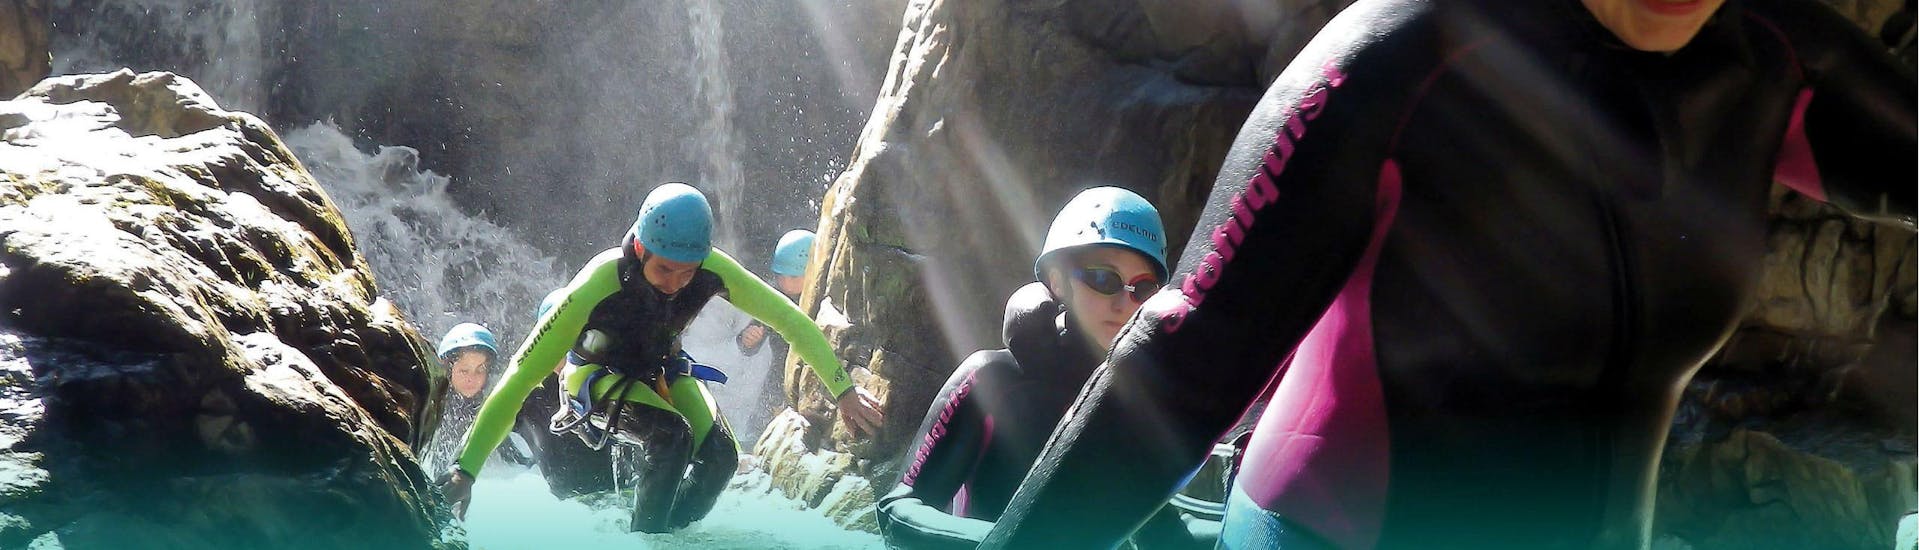 People climbing while Canyoning in East Tyrol - Sports Tour with Adventurepark Osttirol